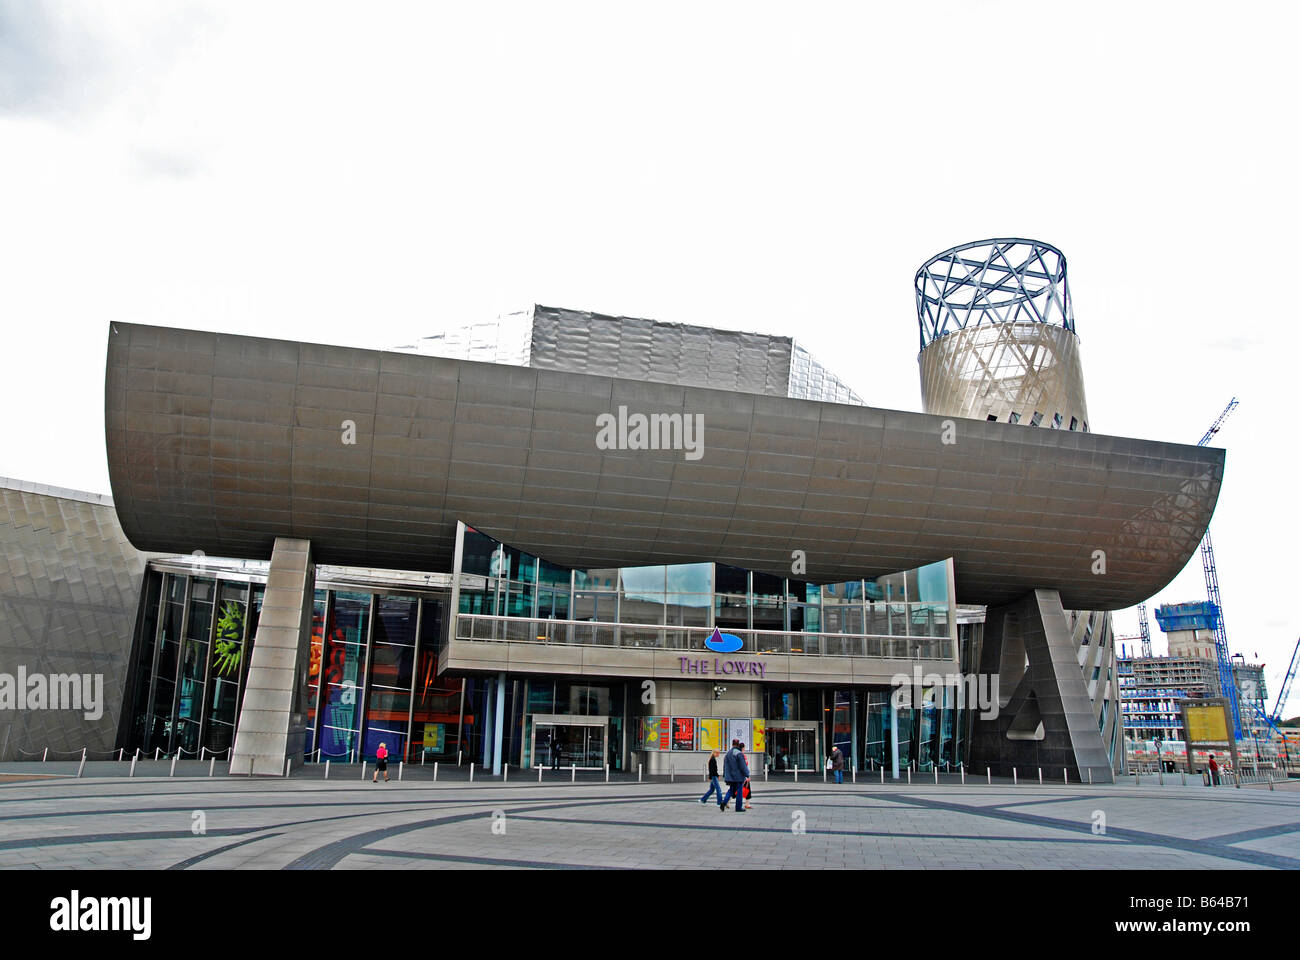 the lowry art gallery and theatre at salford quays,manchester,uk Stock Photo